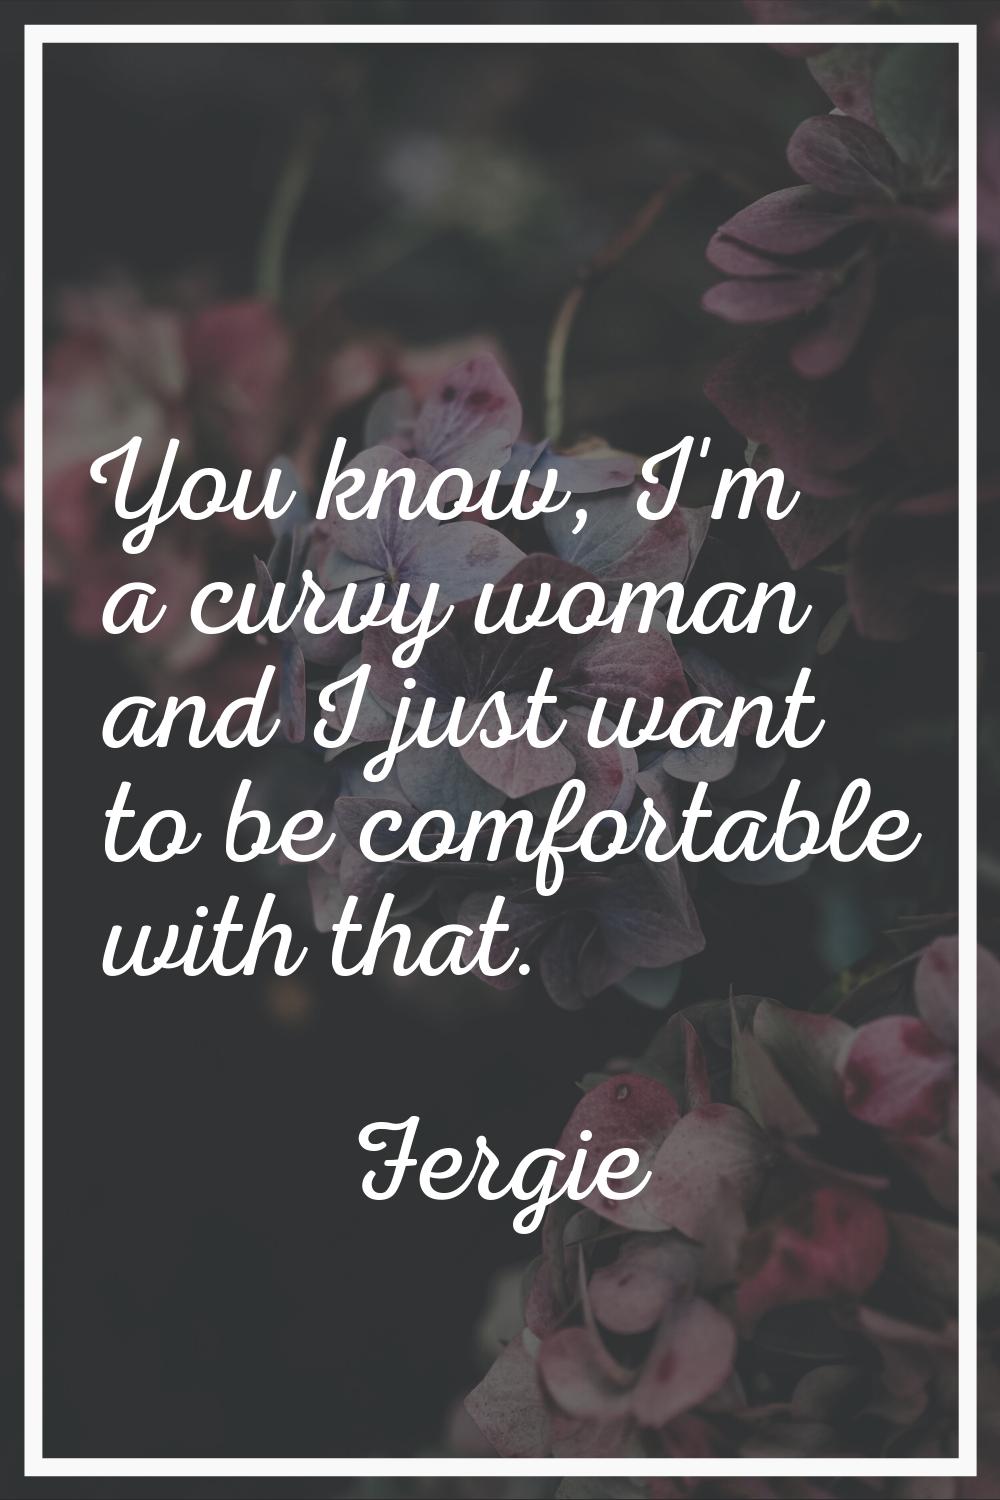 You know, I'm a curvy woman and I just want to be comfortable with that.